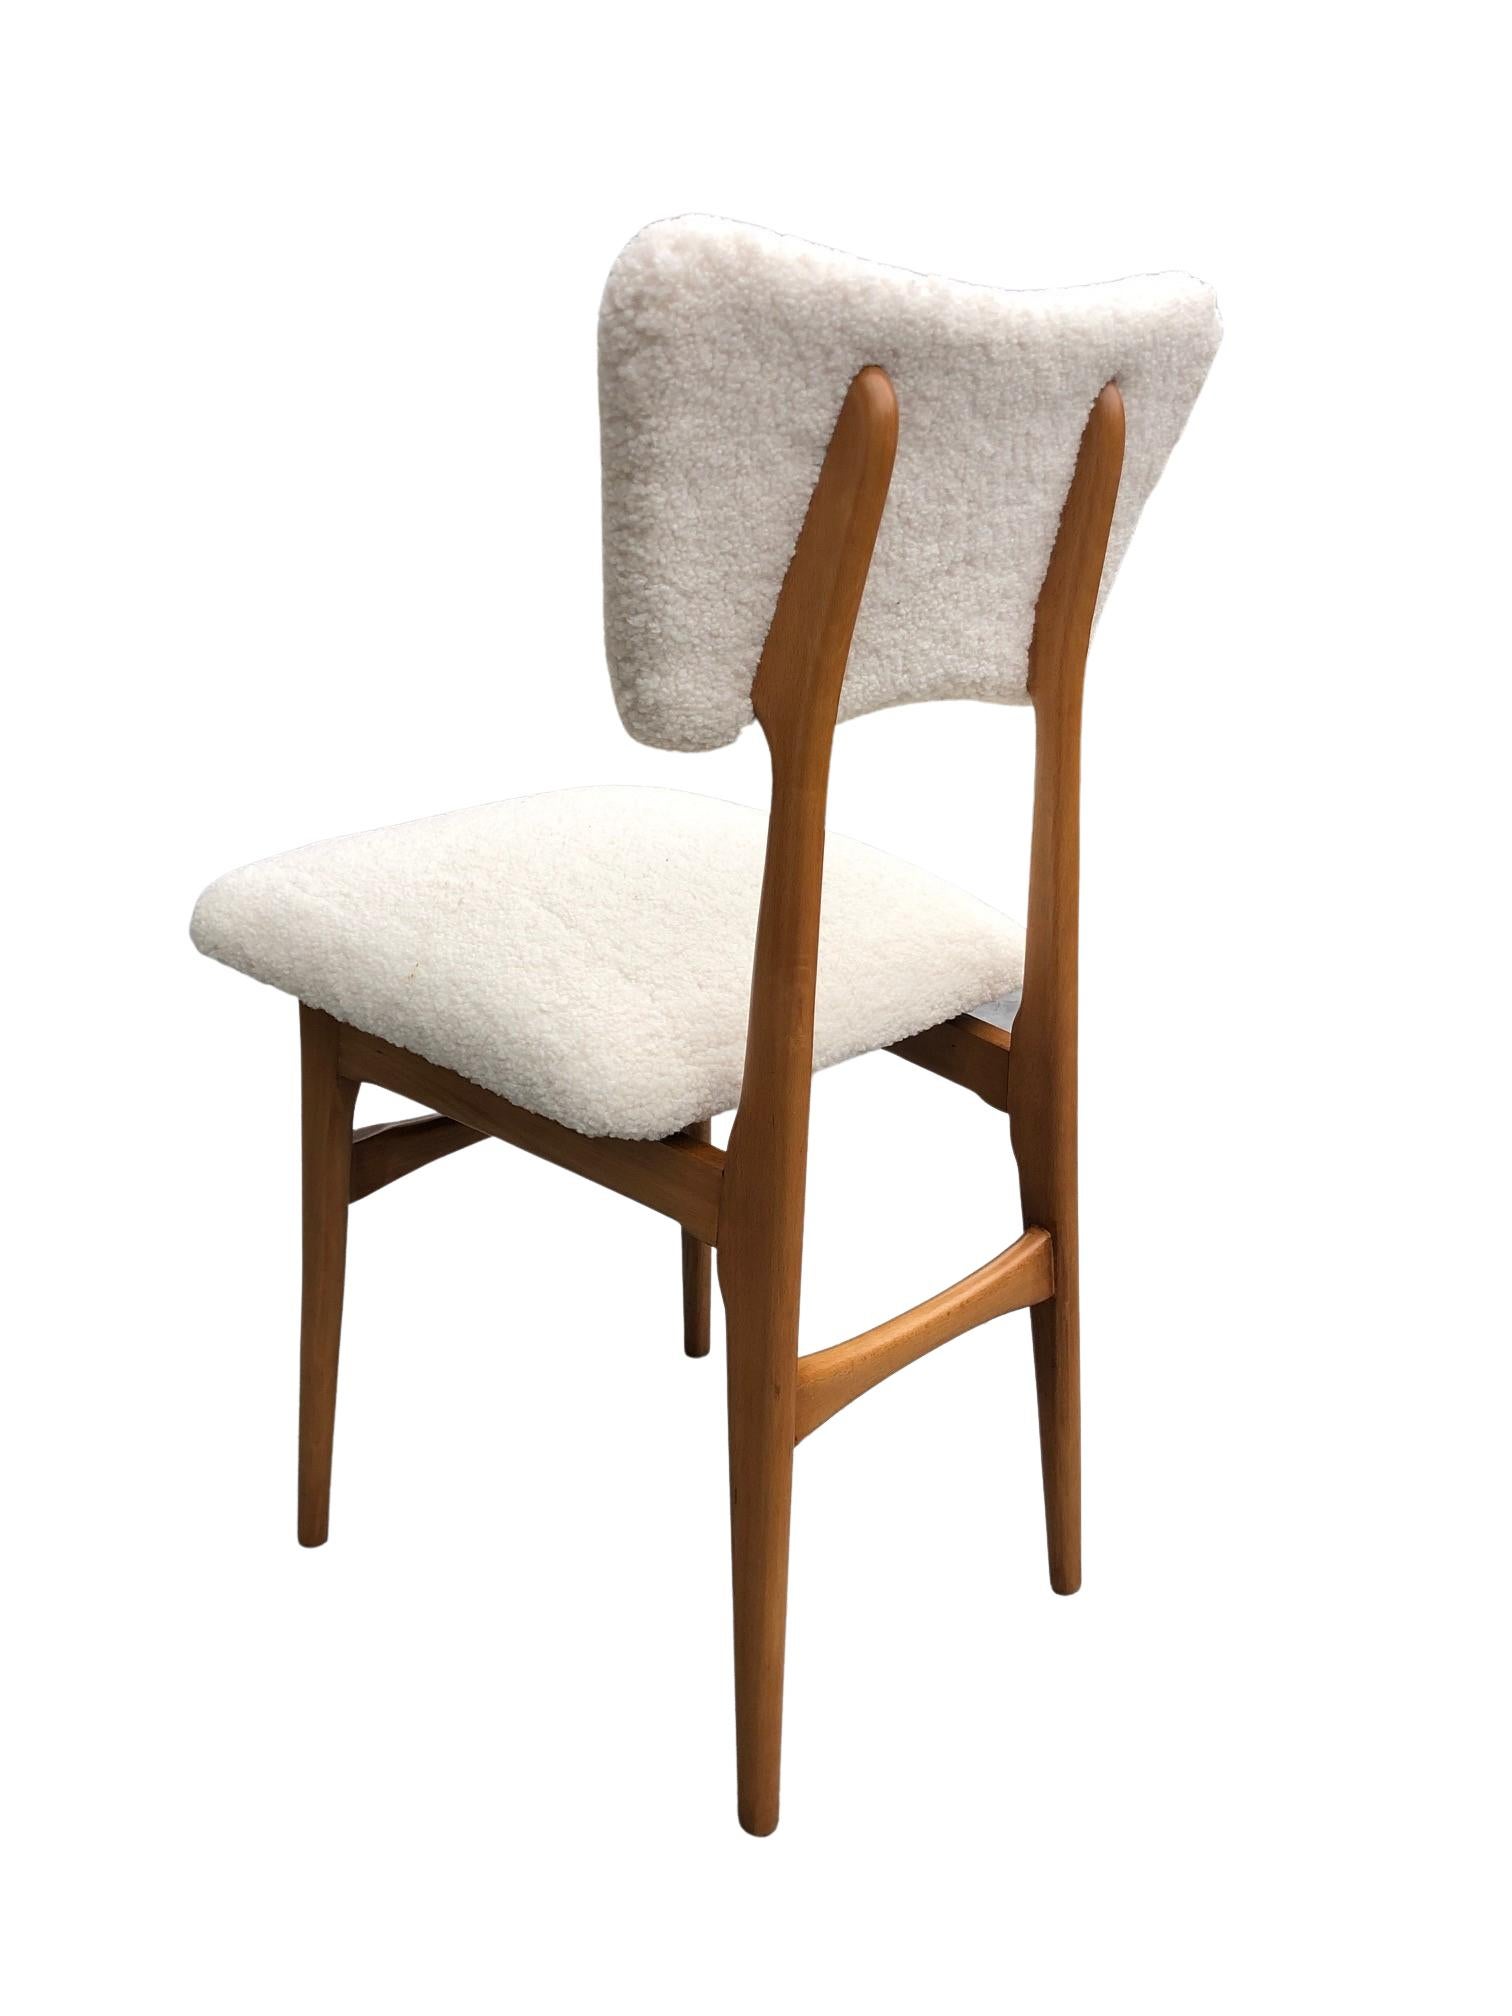 Midcentury Cream Bouclé and Wood Dining Chairs, Europe, 1960s, Set of Four For Sale 13